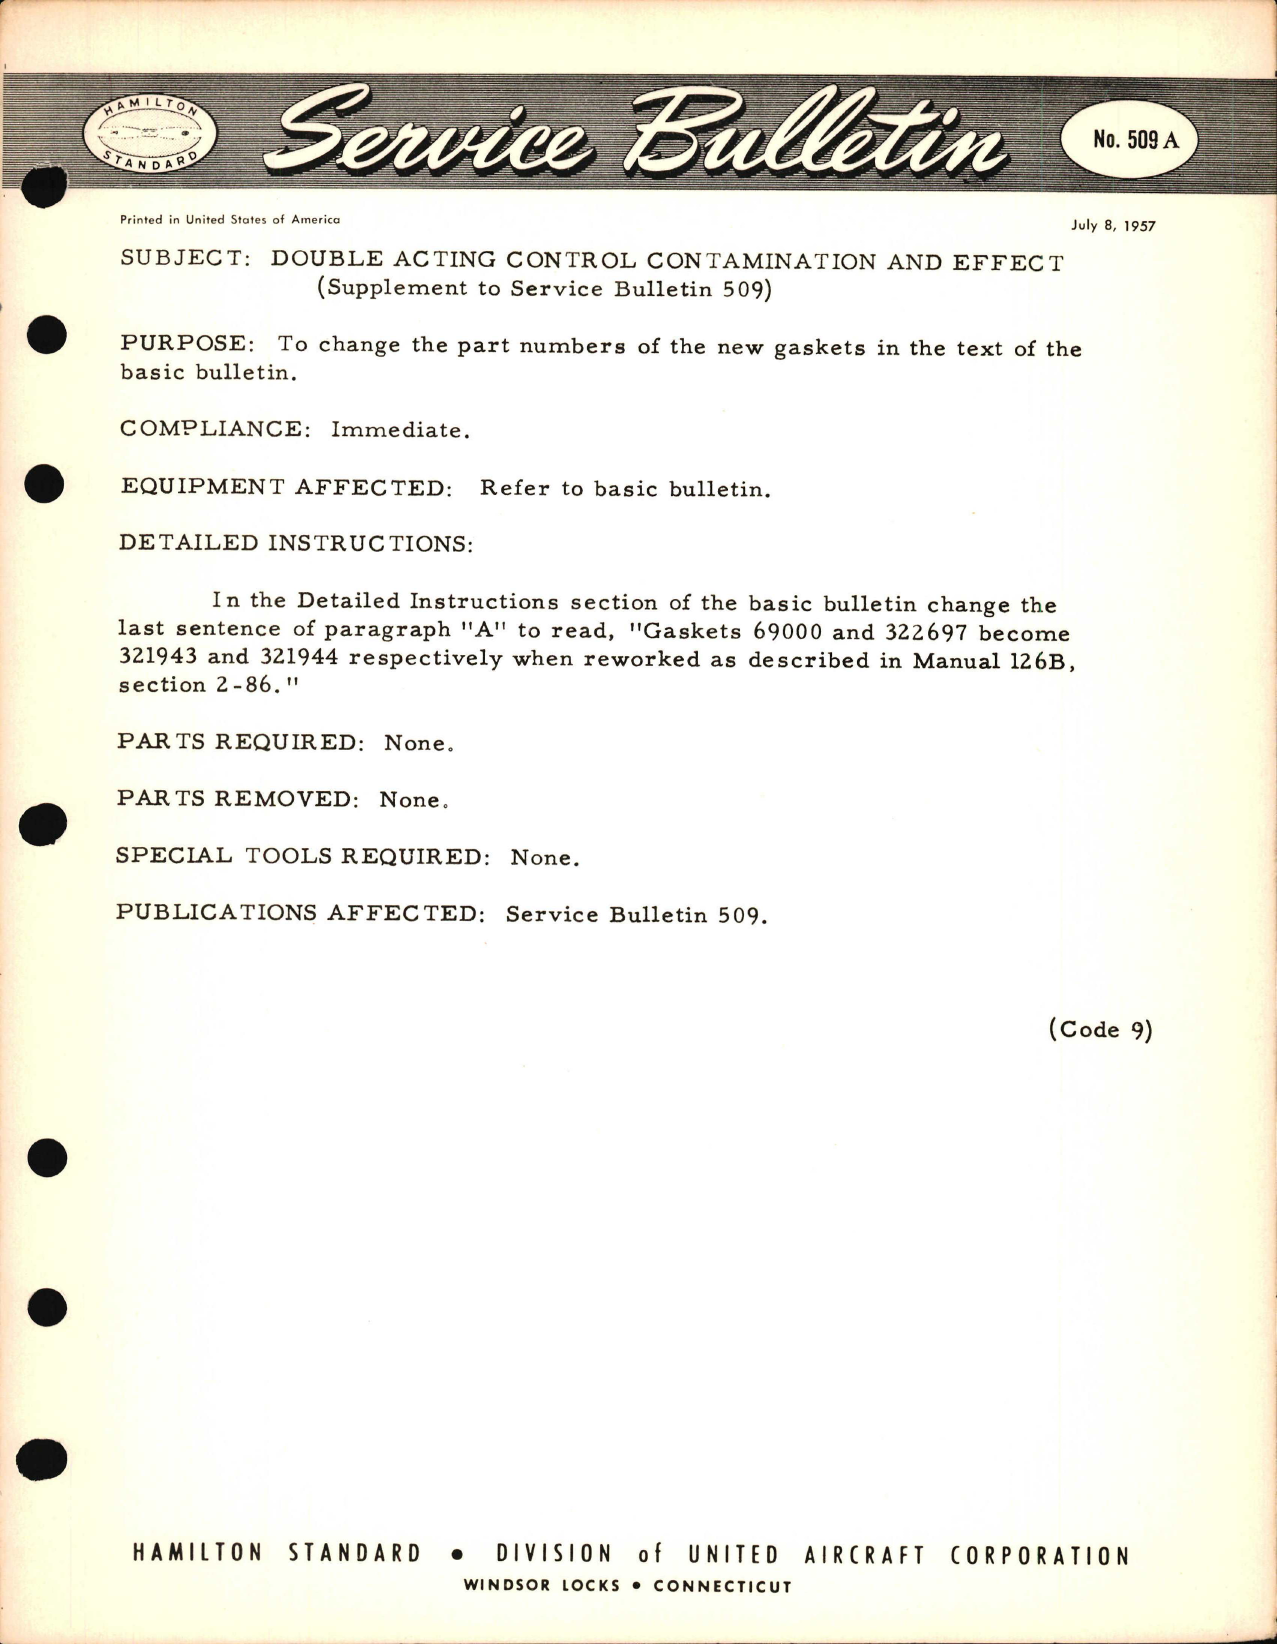 Sample page 1 from AirCorps Library document: Double Acting Control Contamination and Effect